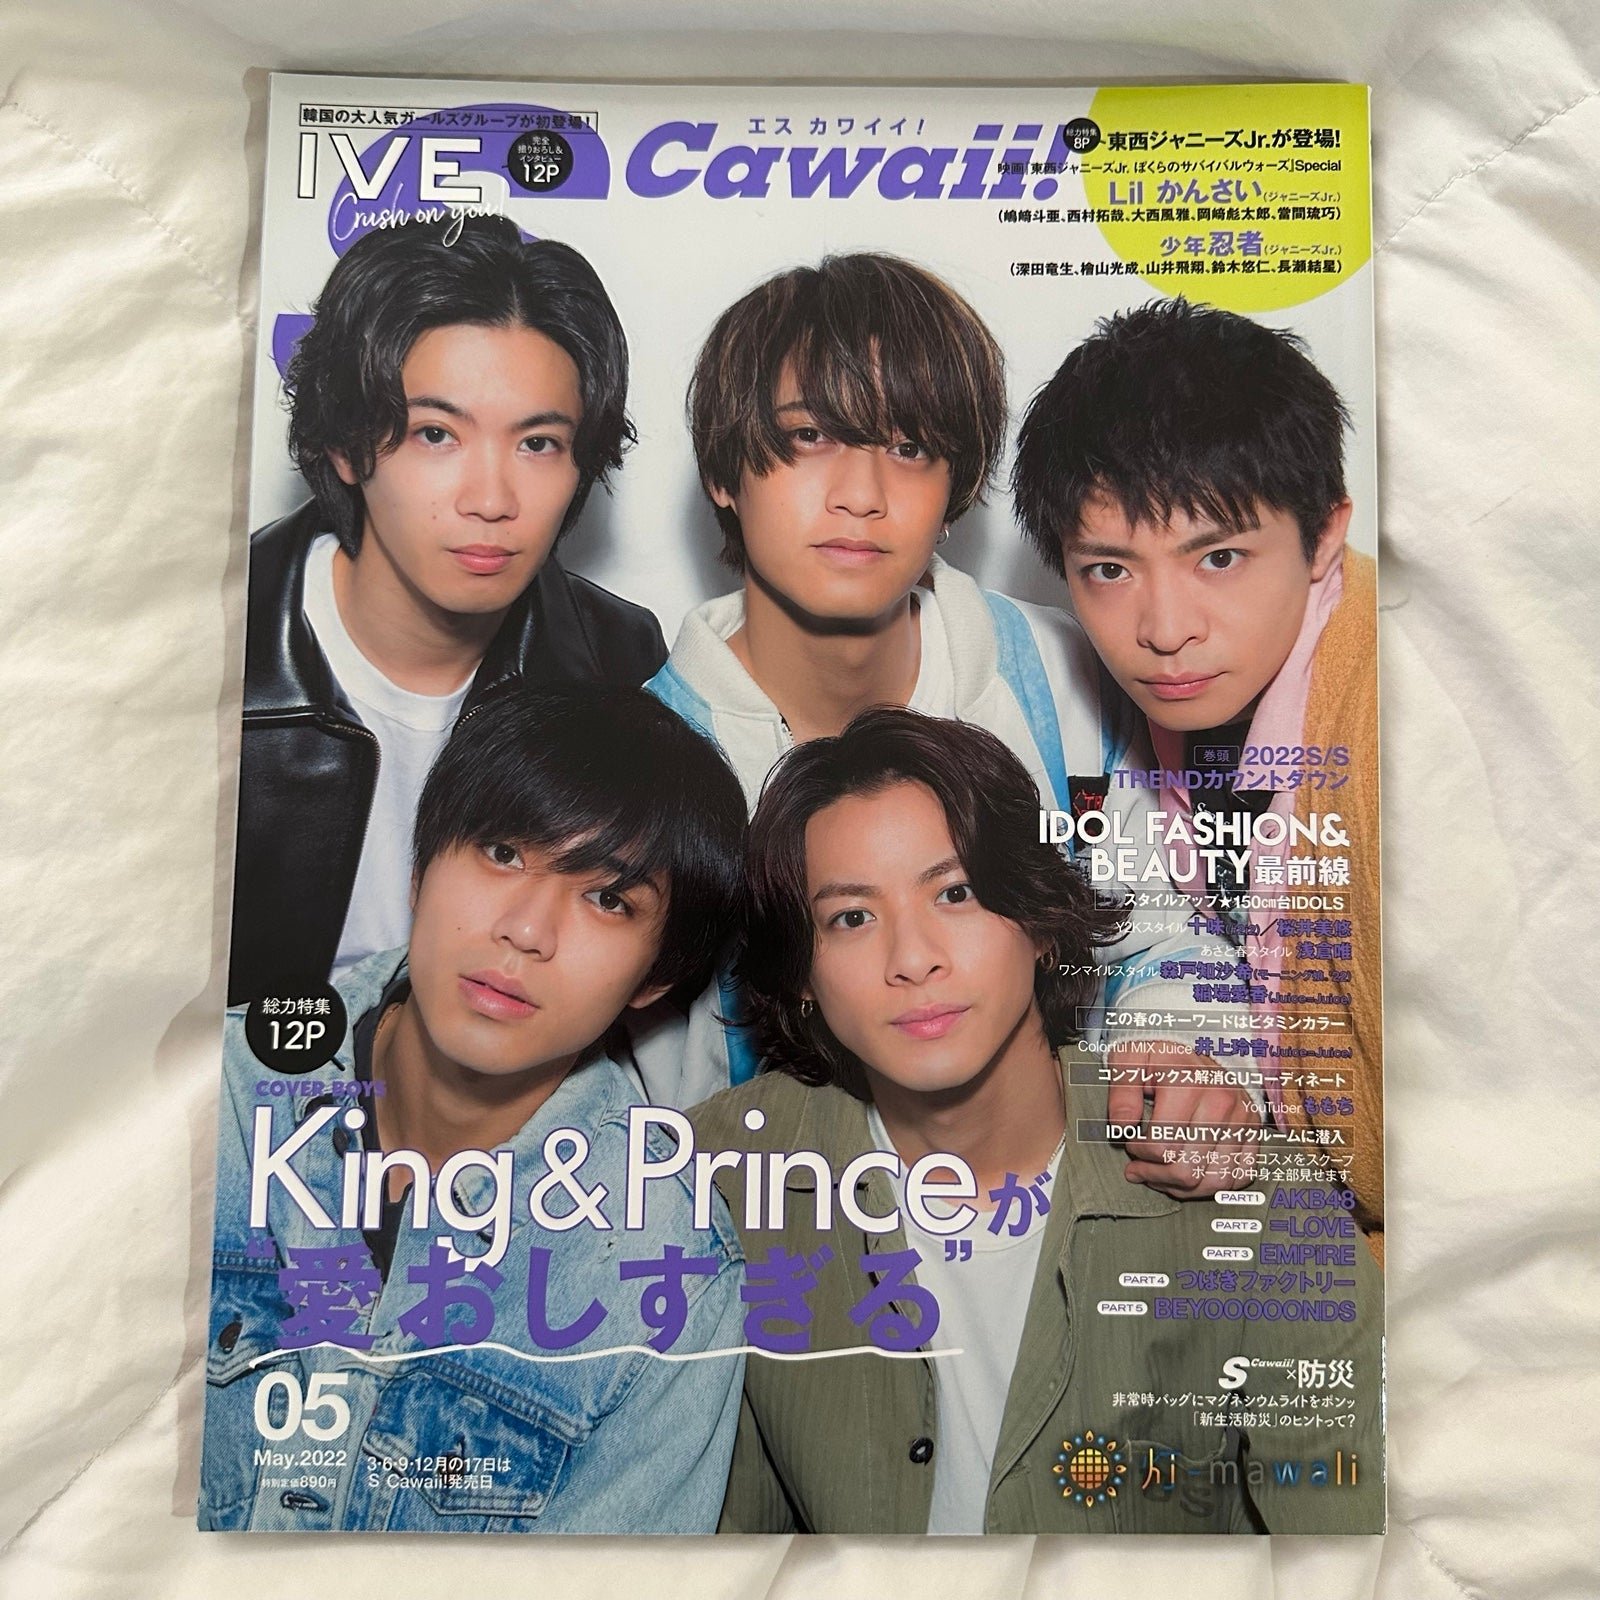 King & Prince “S Cawaii” Magazine May 2022 Issue nZz2nUS7J